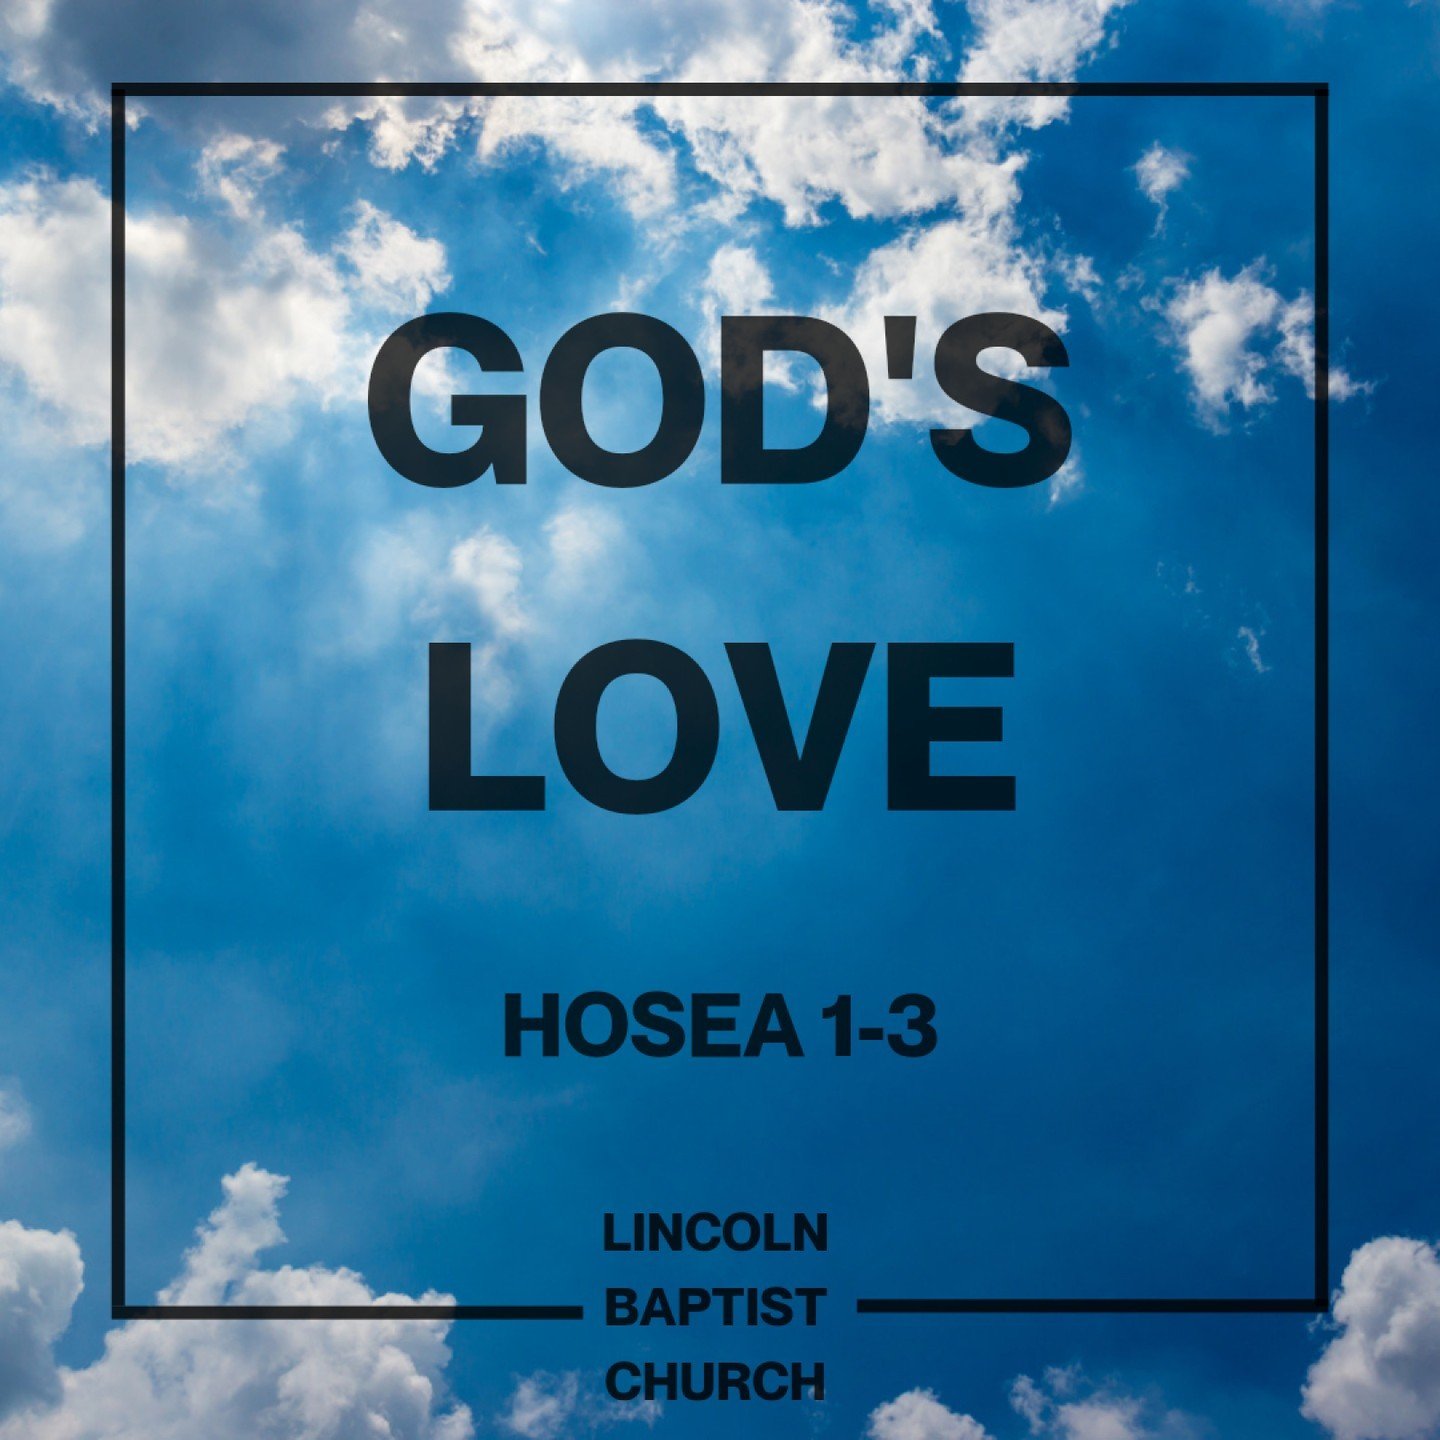 We had a wonderful morning of worship, prayer, teaching and fellowship on Sunday.  If you missed this week's sermon on Hosea 1-3 brought to us by our Pastor, Daniel, don't worry! You can catch up on it by visiting our website, SoundCloud or Spotify.
